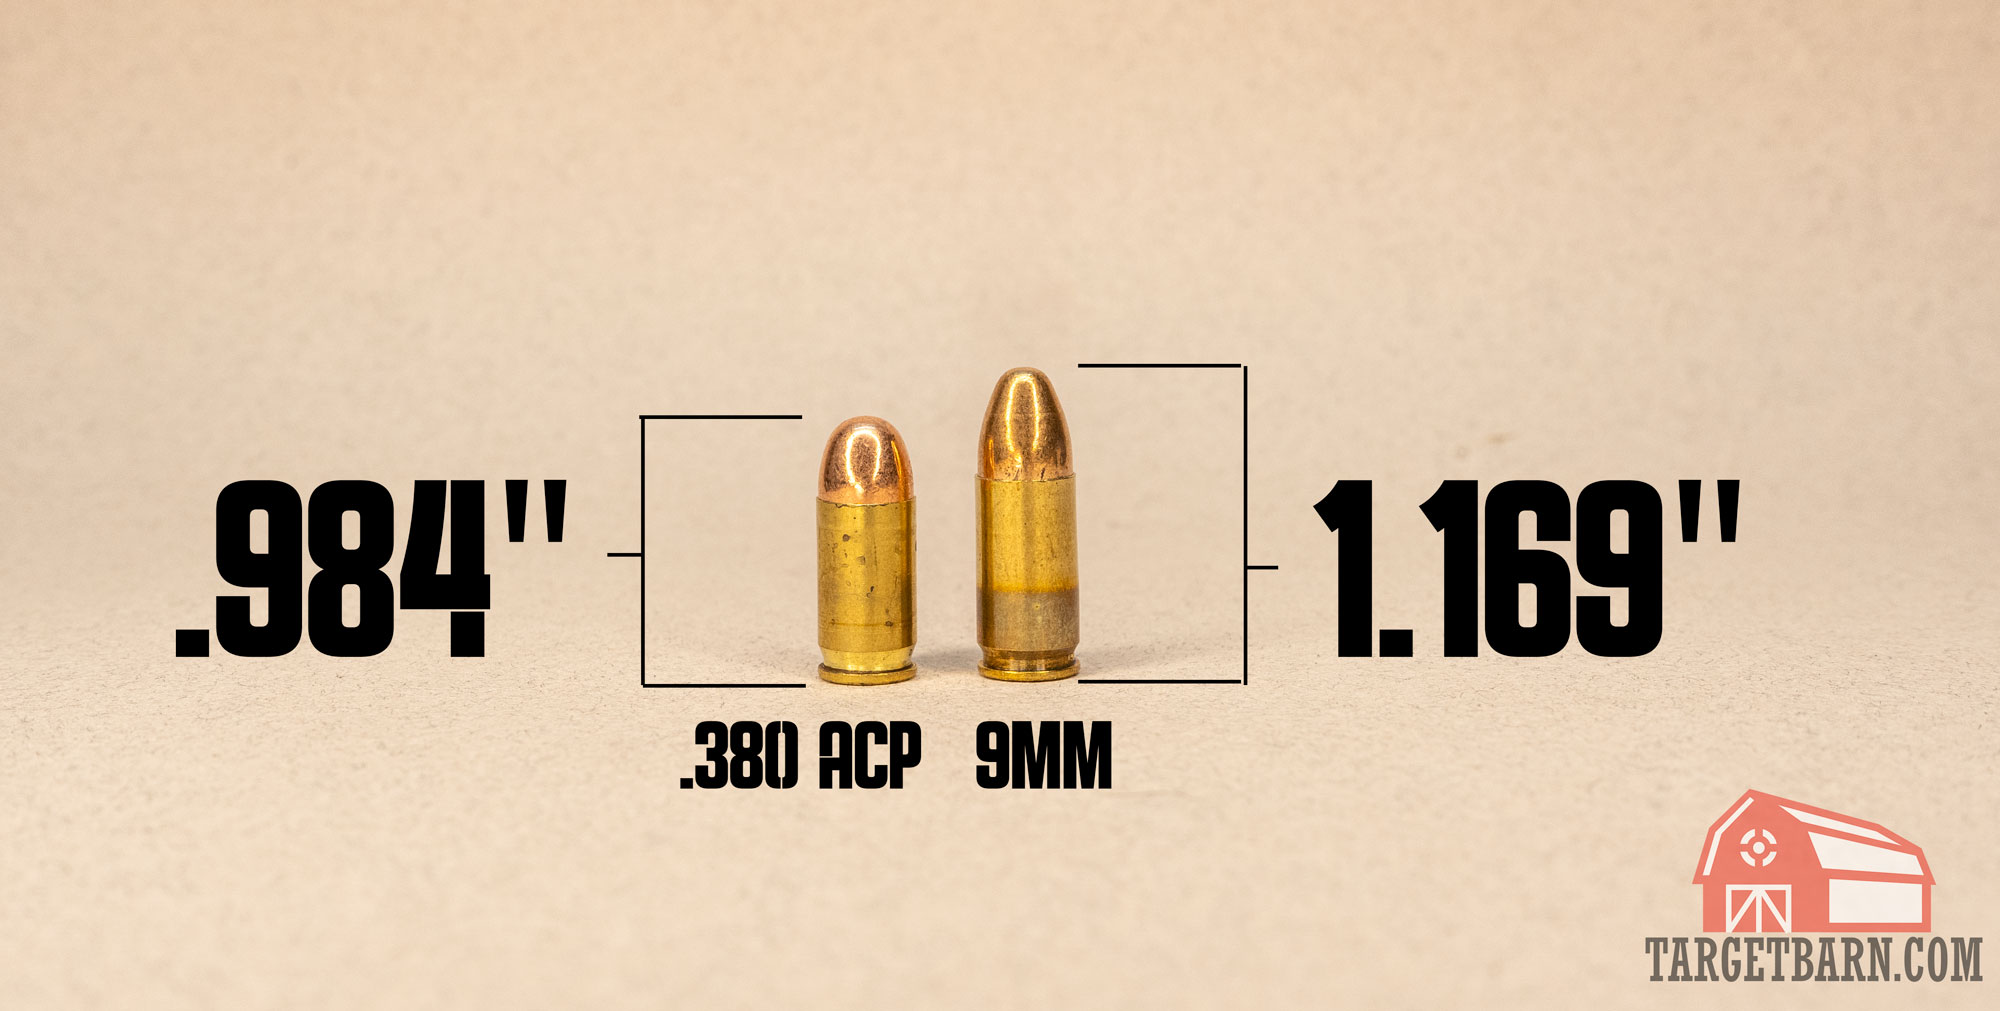 comparing the sizes of .380 vs. 9mm ammo